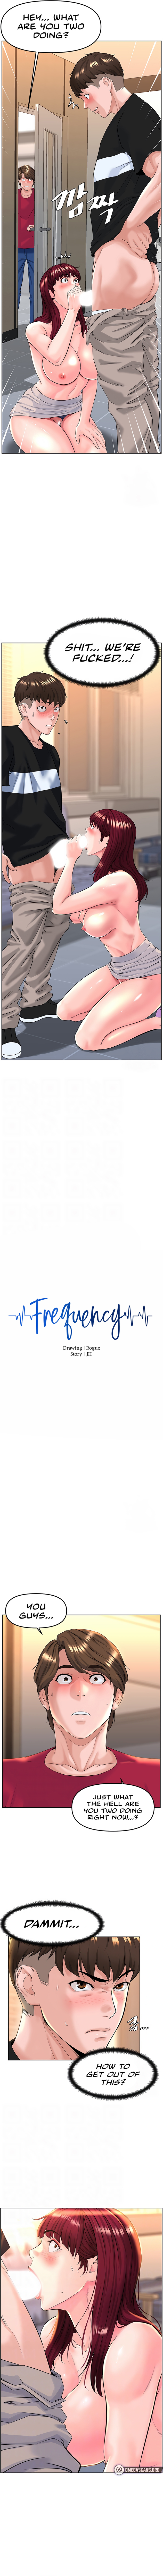 Frequency NEW image